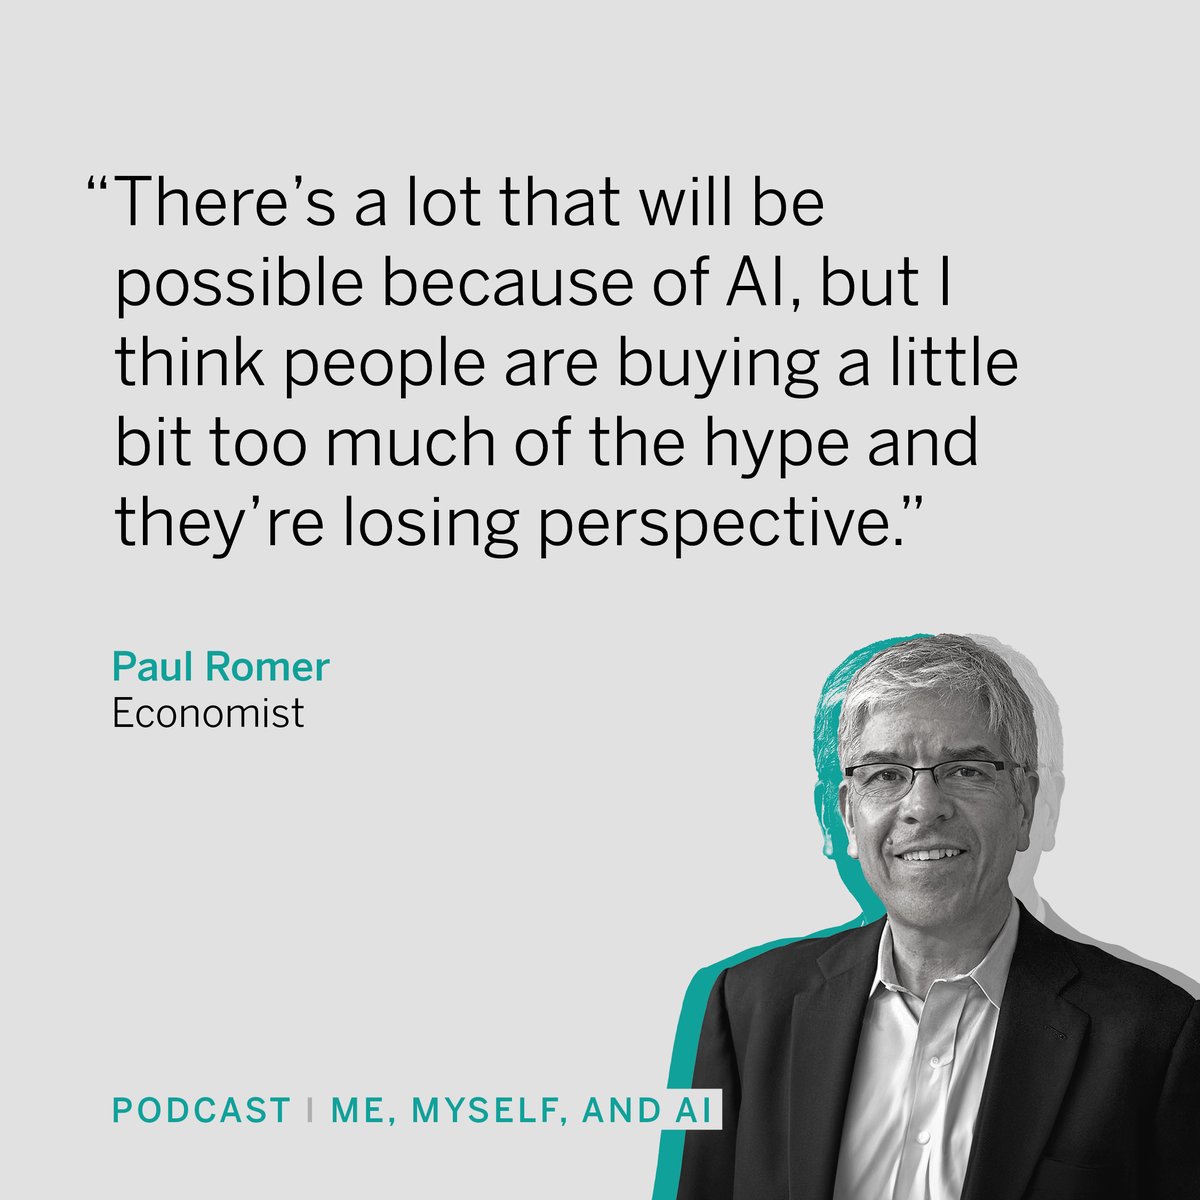 On this episode of the Me, Myself, and AI podcast, Nobel Prize-winning economist Paul Romer shares his views on AI advances and their implications for society. mitsmr.com/3aRANTd